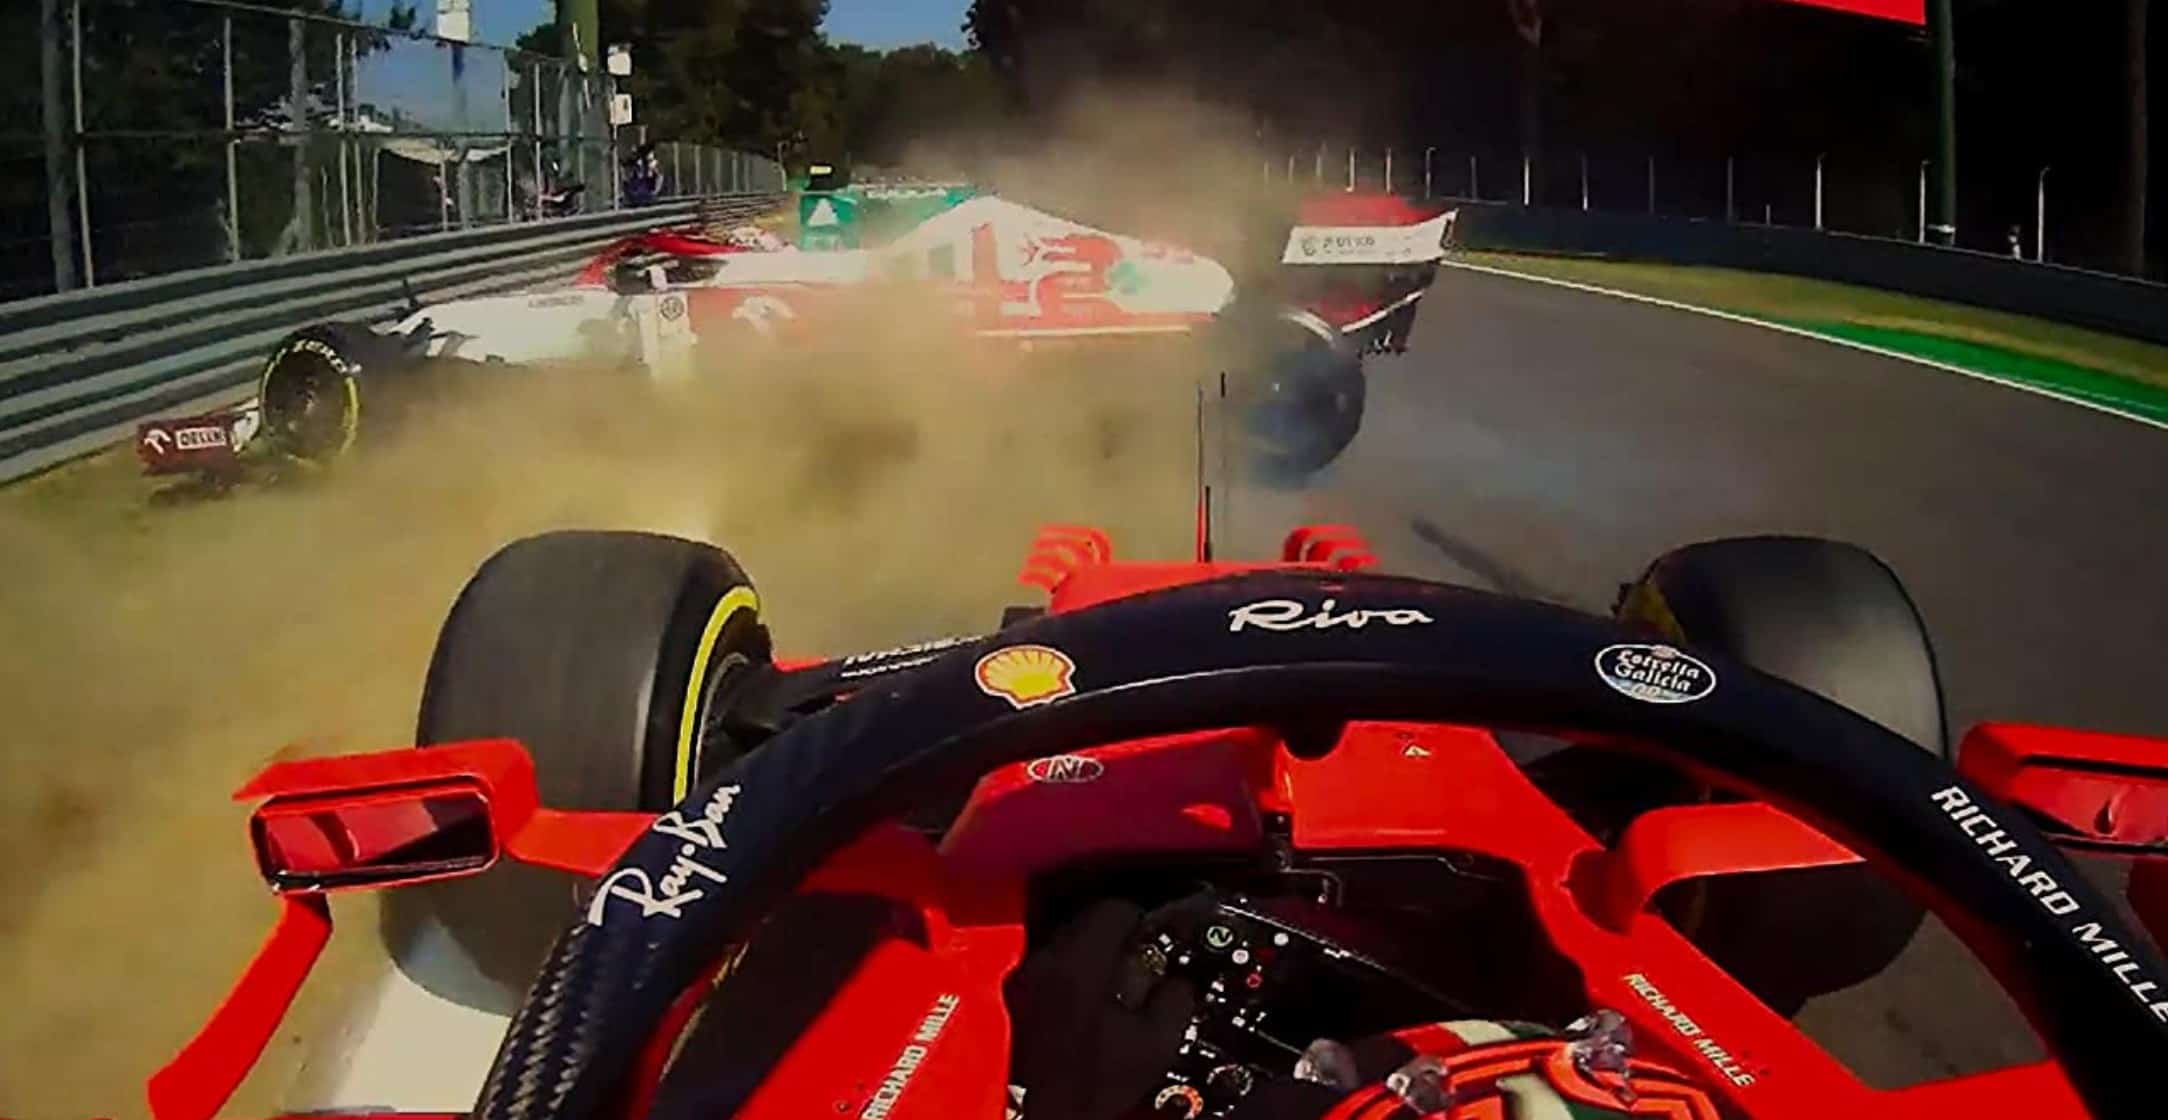 A Formula 1 car crashes into a wall in this image from Netflix